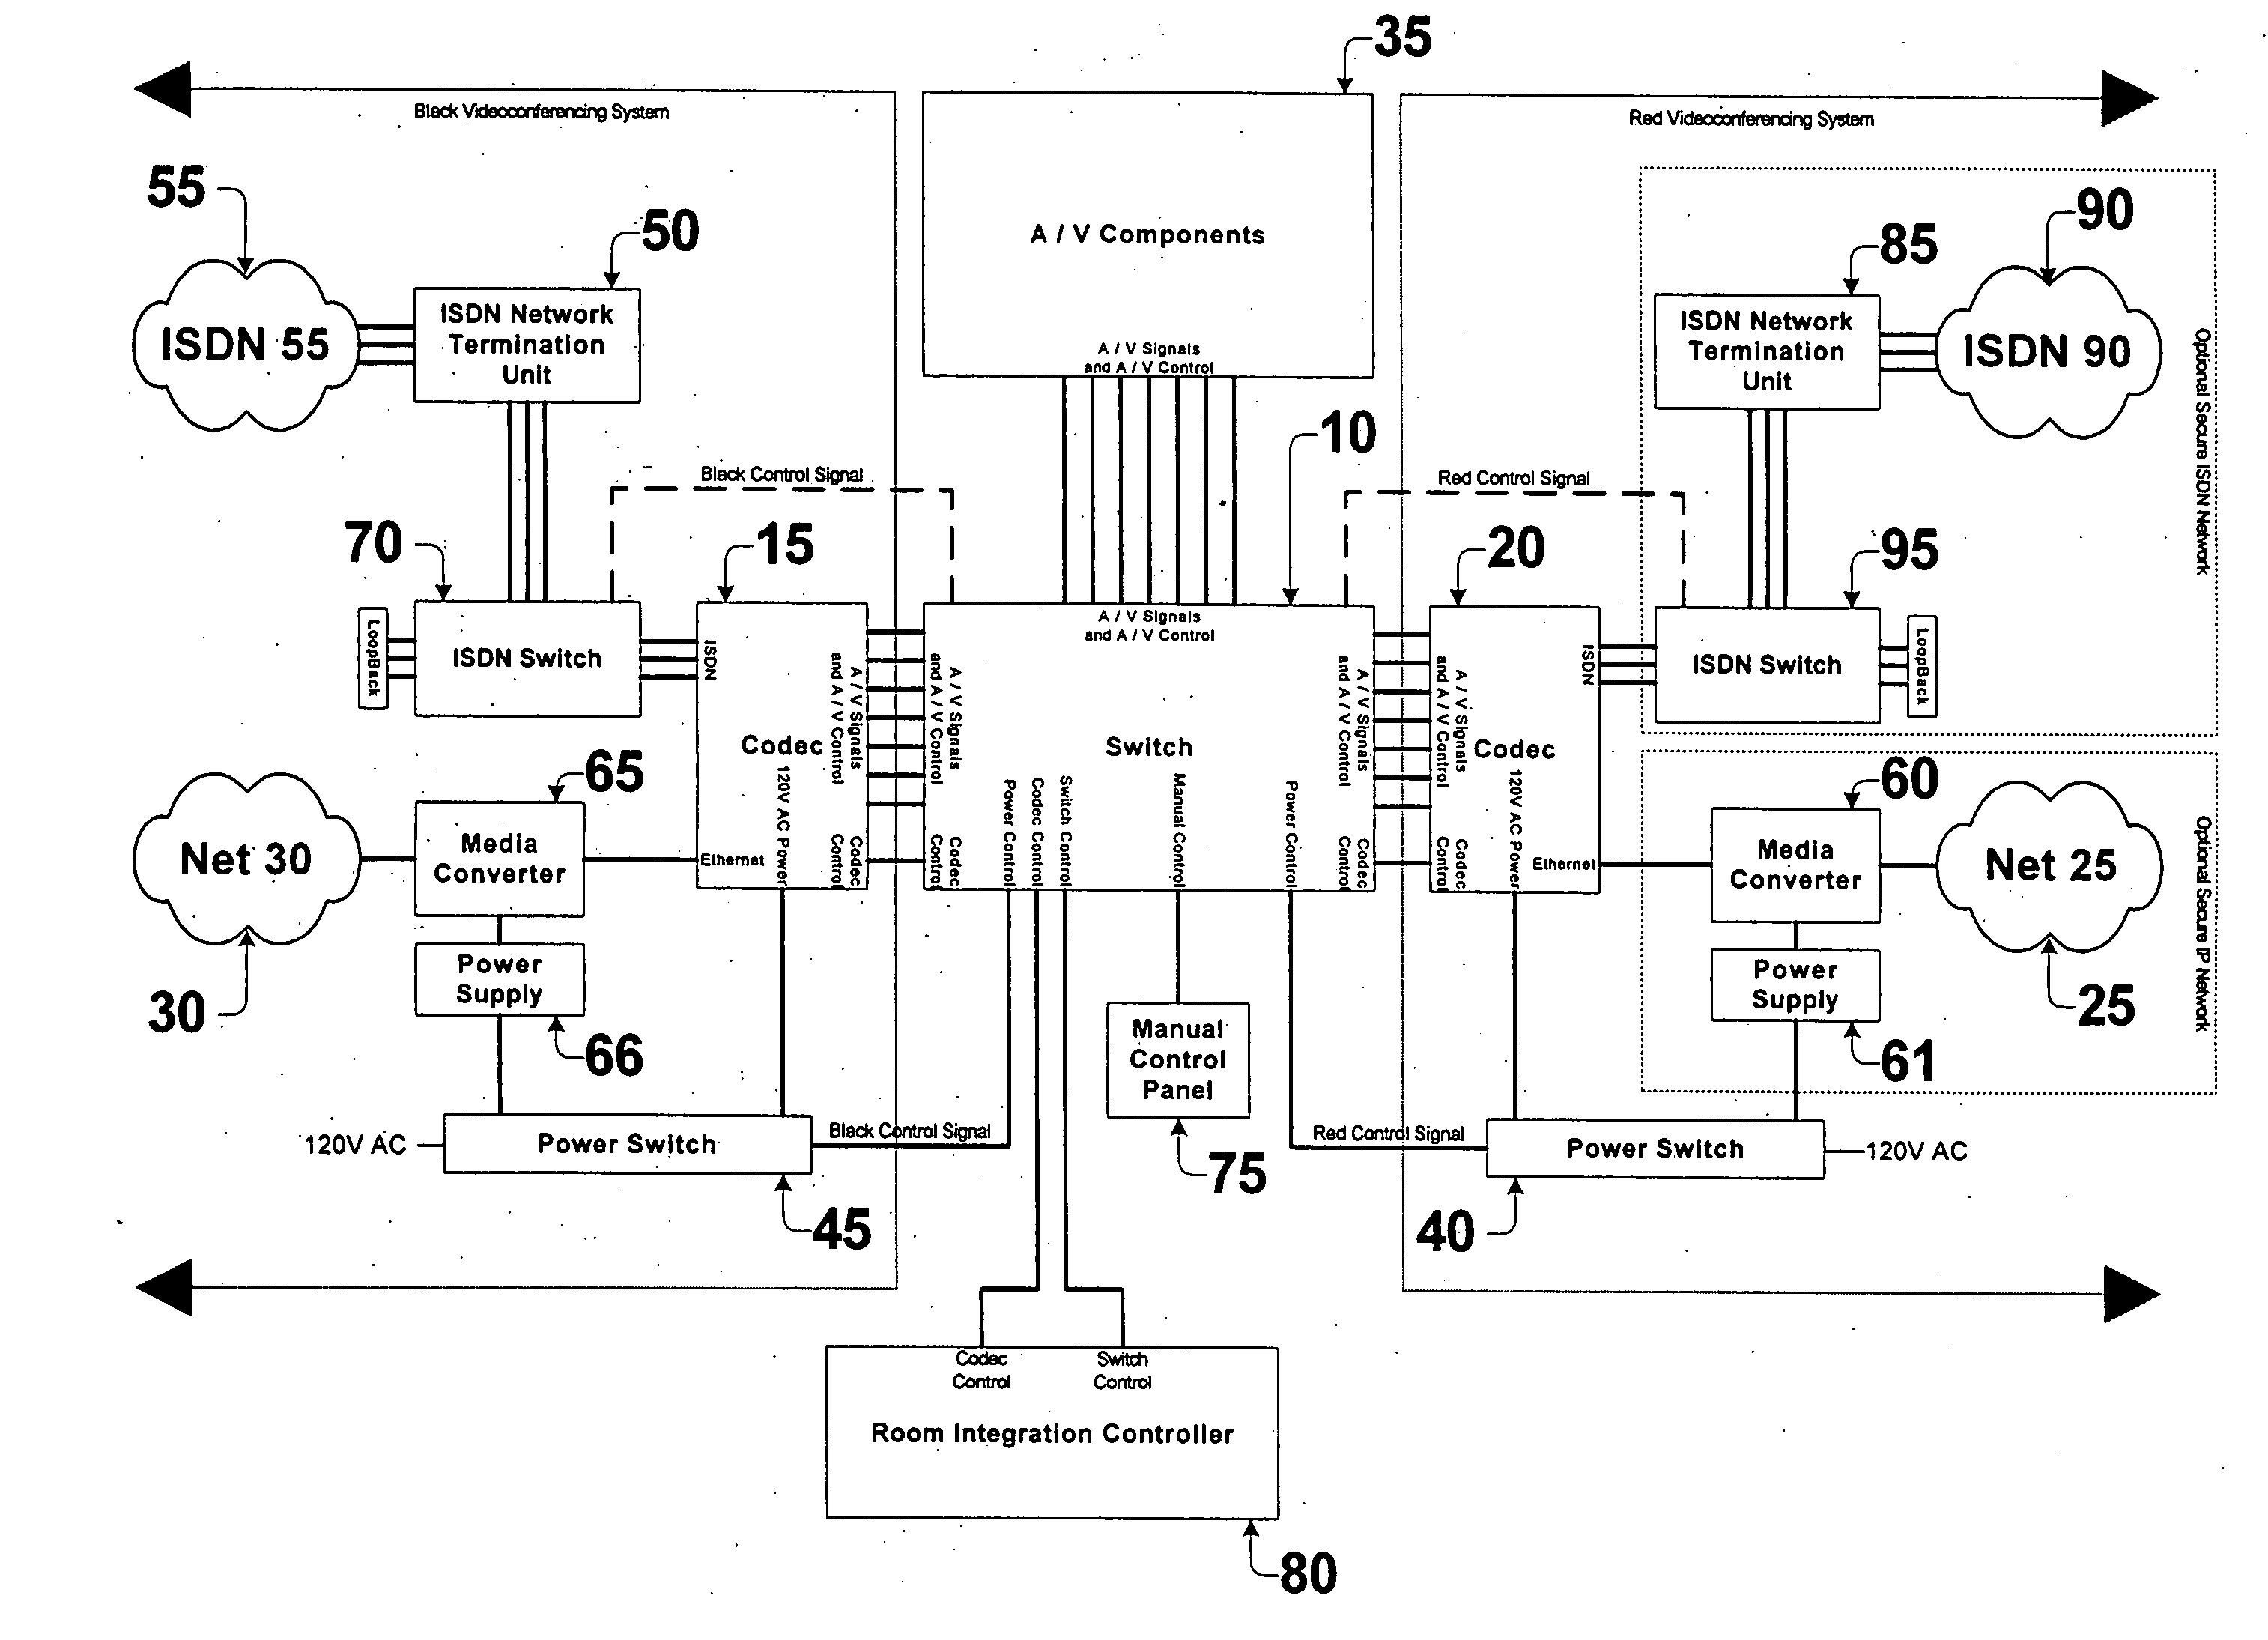 Secure videoconferencing equipment switching system and method